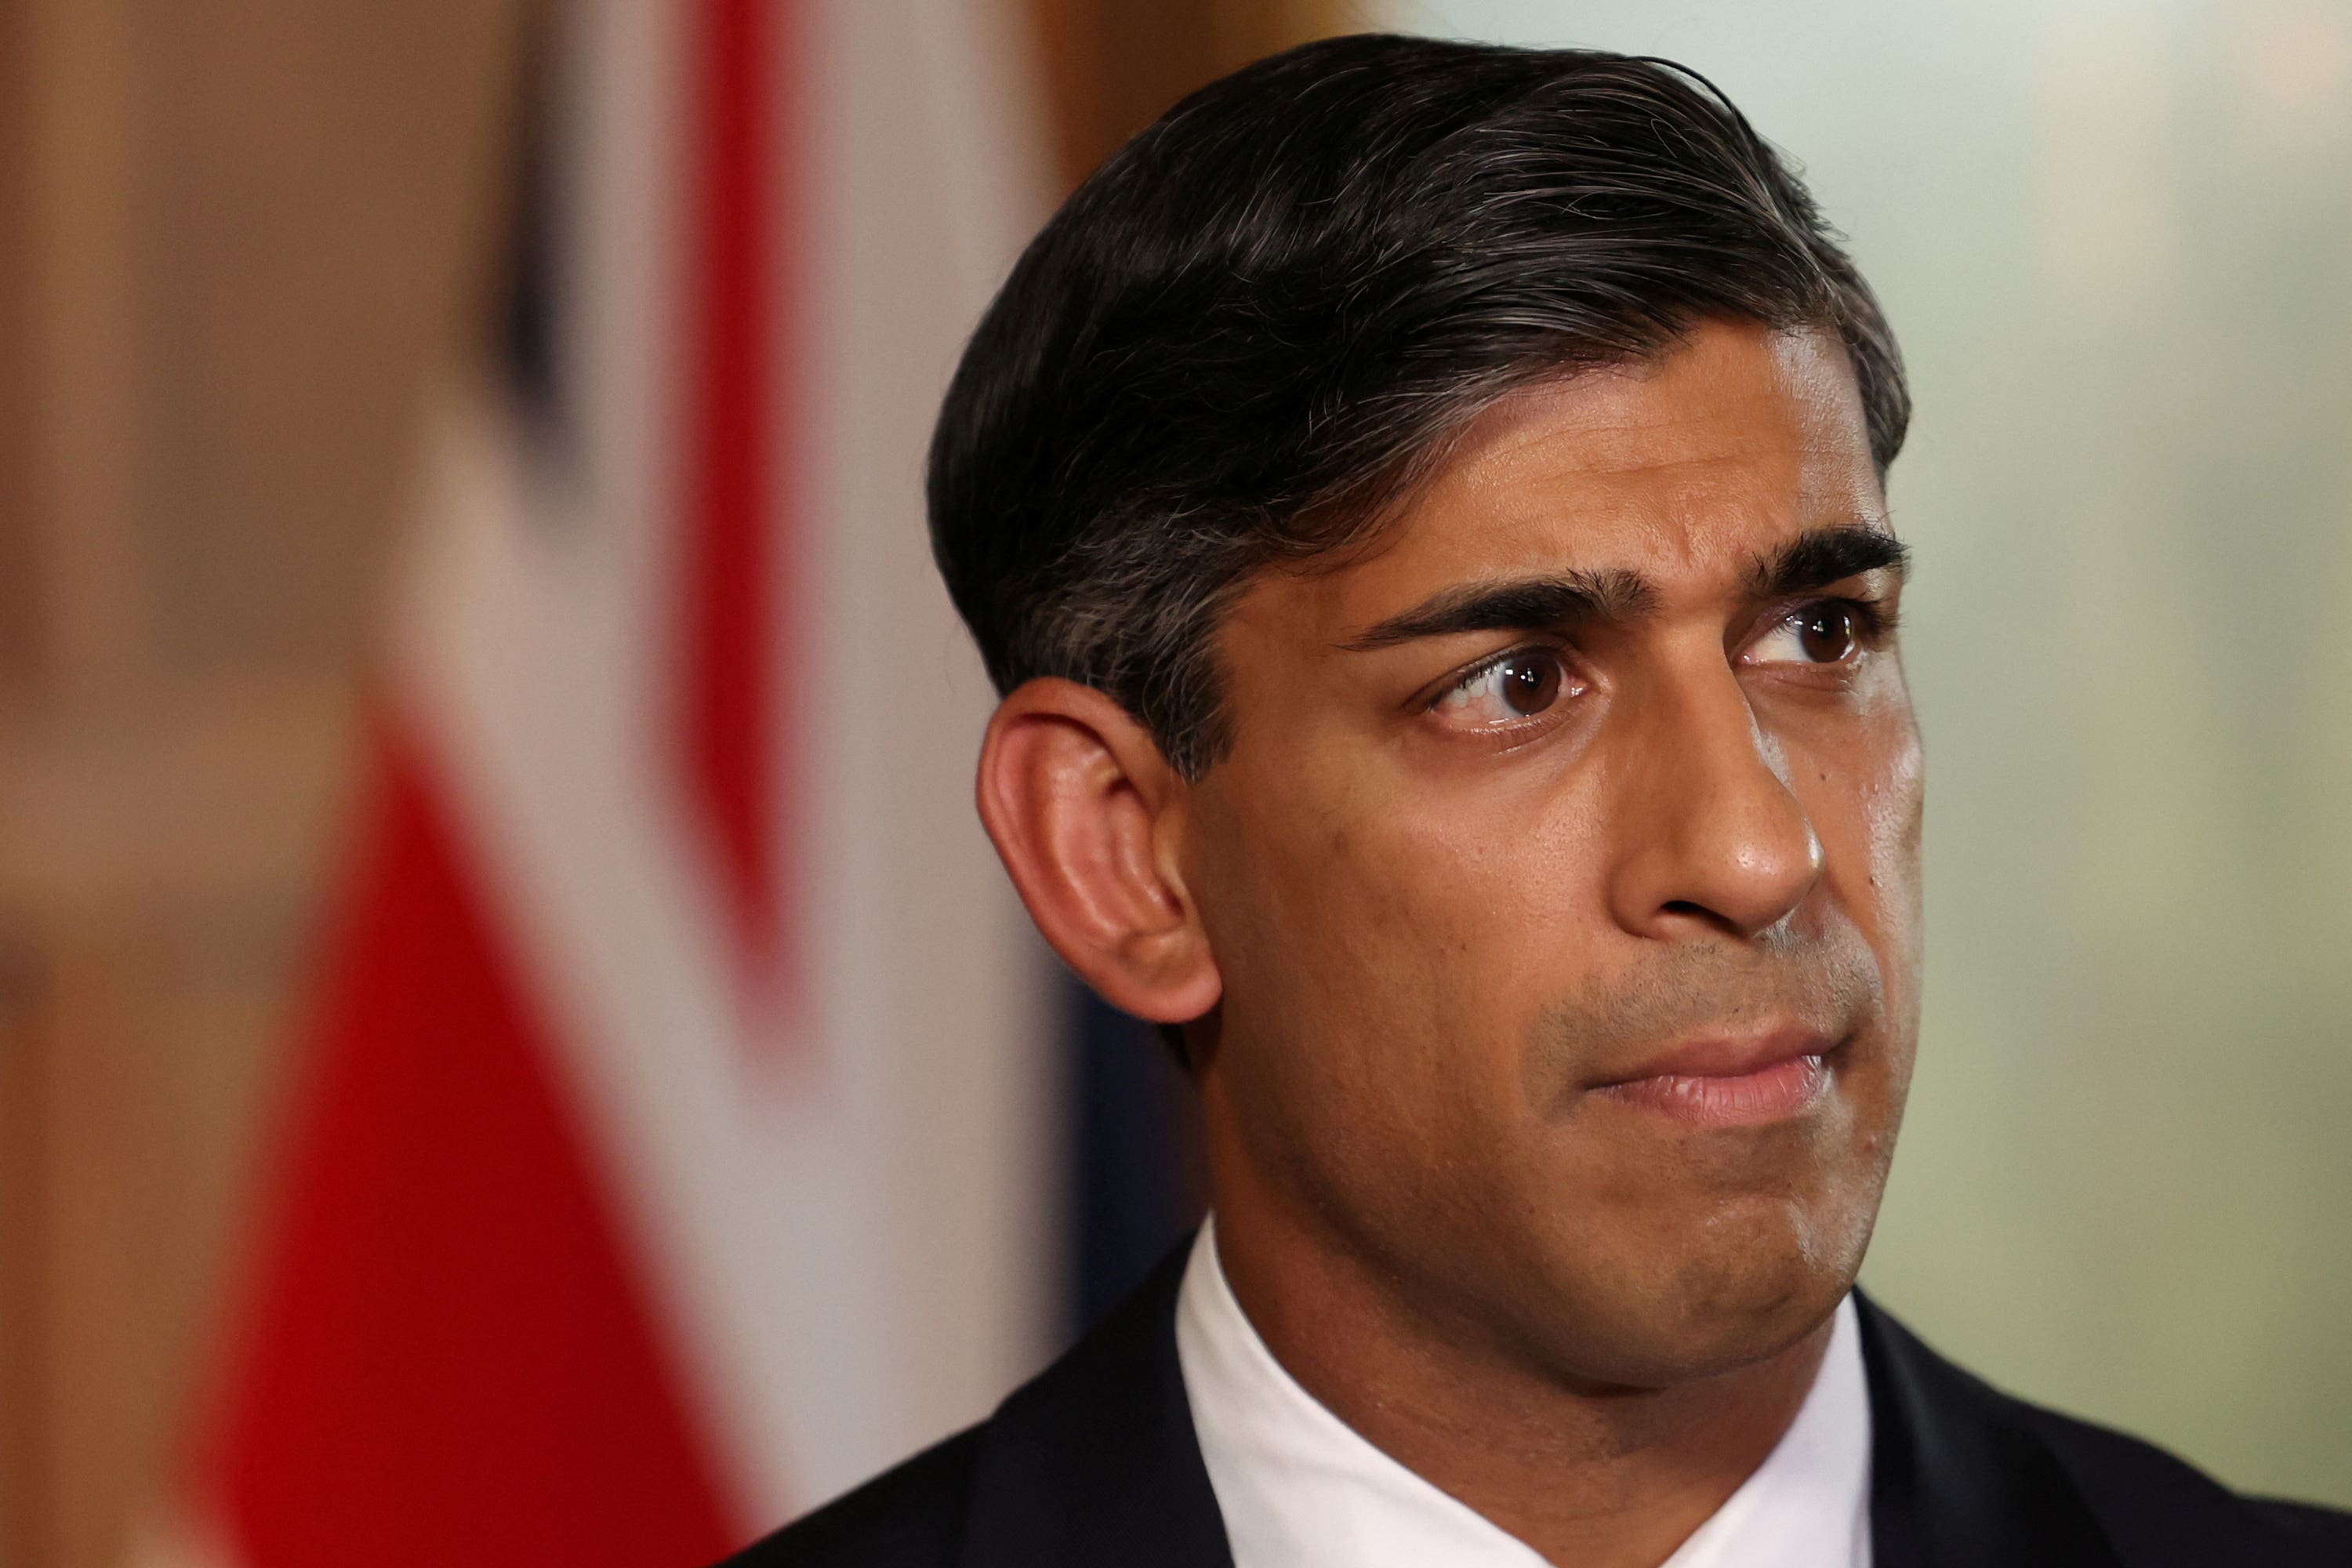 Rishi Sunak may be more effective and trusted on the world stage than his predecessors, but it is domestically that he needs a boost